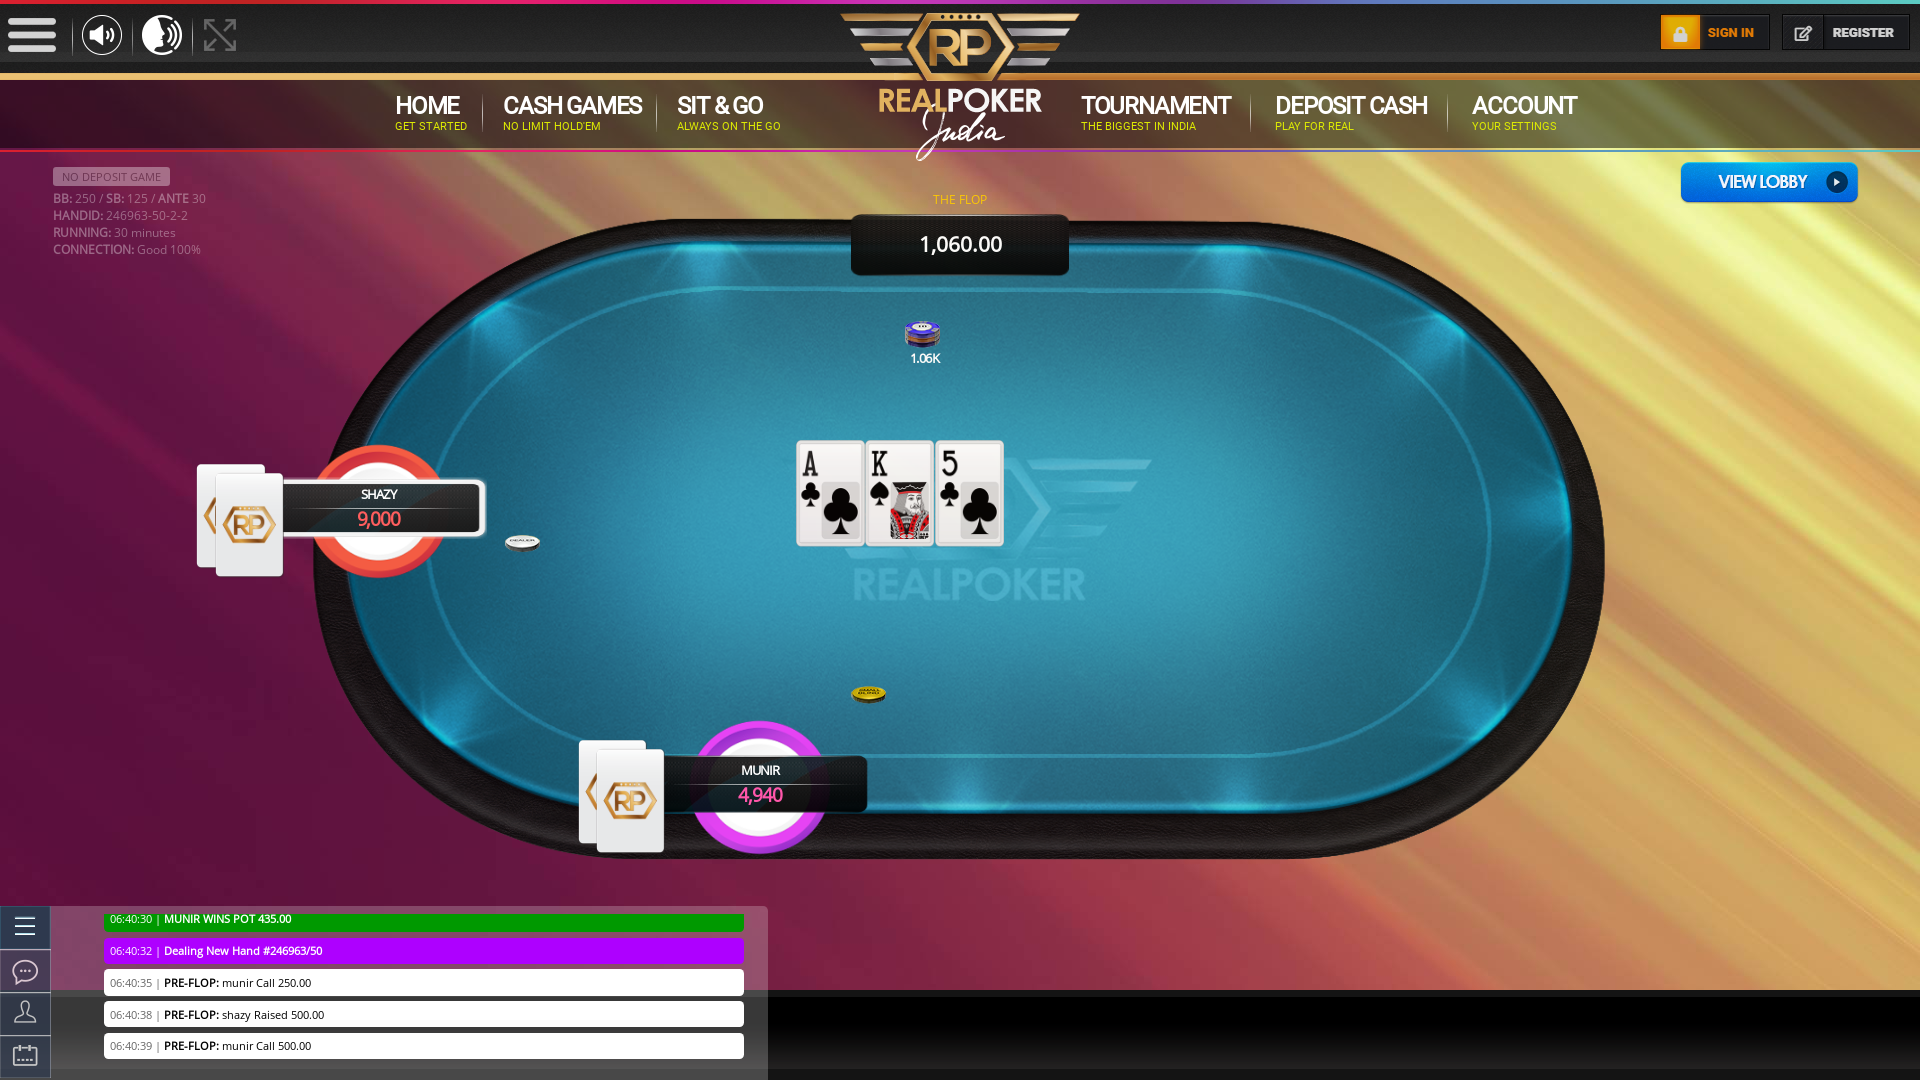 Real Indian poker on a 10 player table in the 30th minute of the game